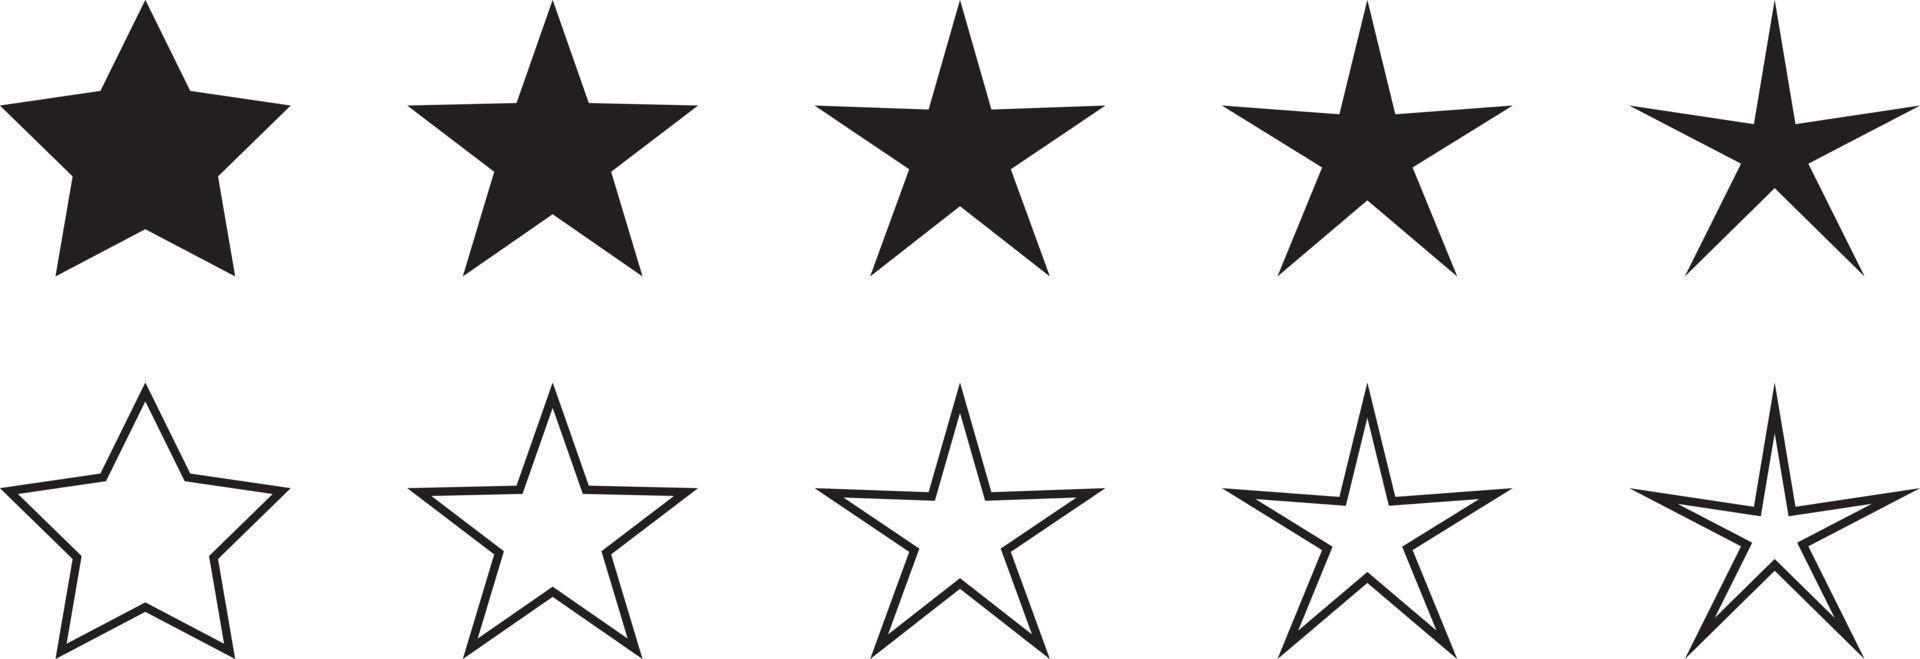 Stars collection vector icons. Different stars set